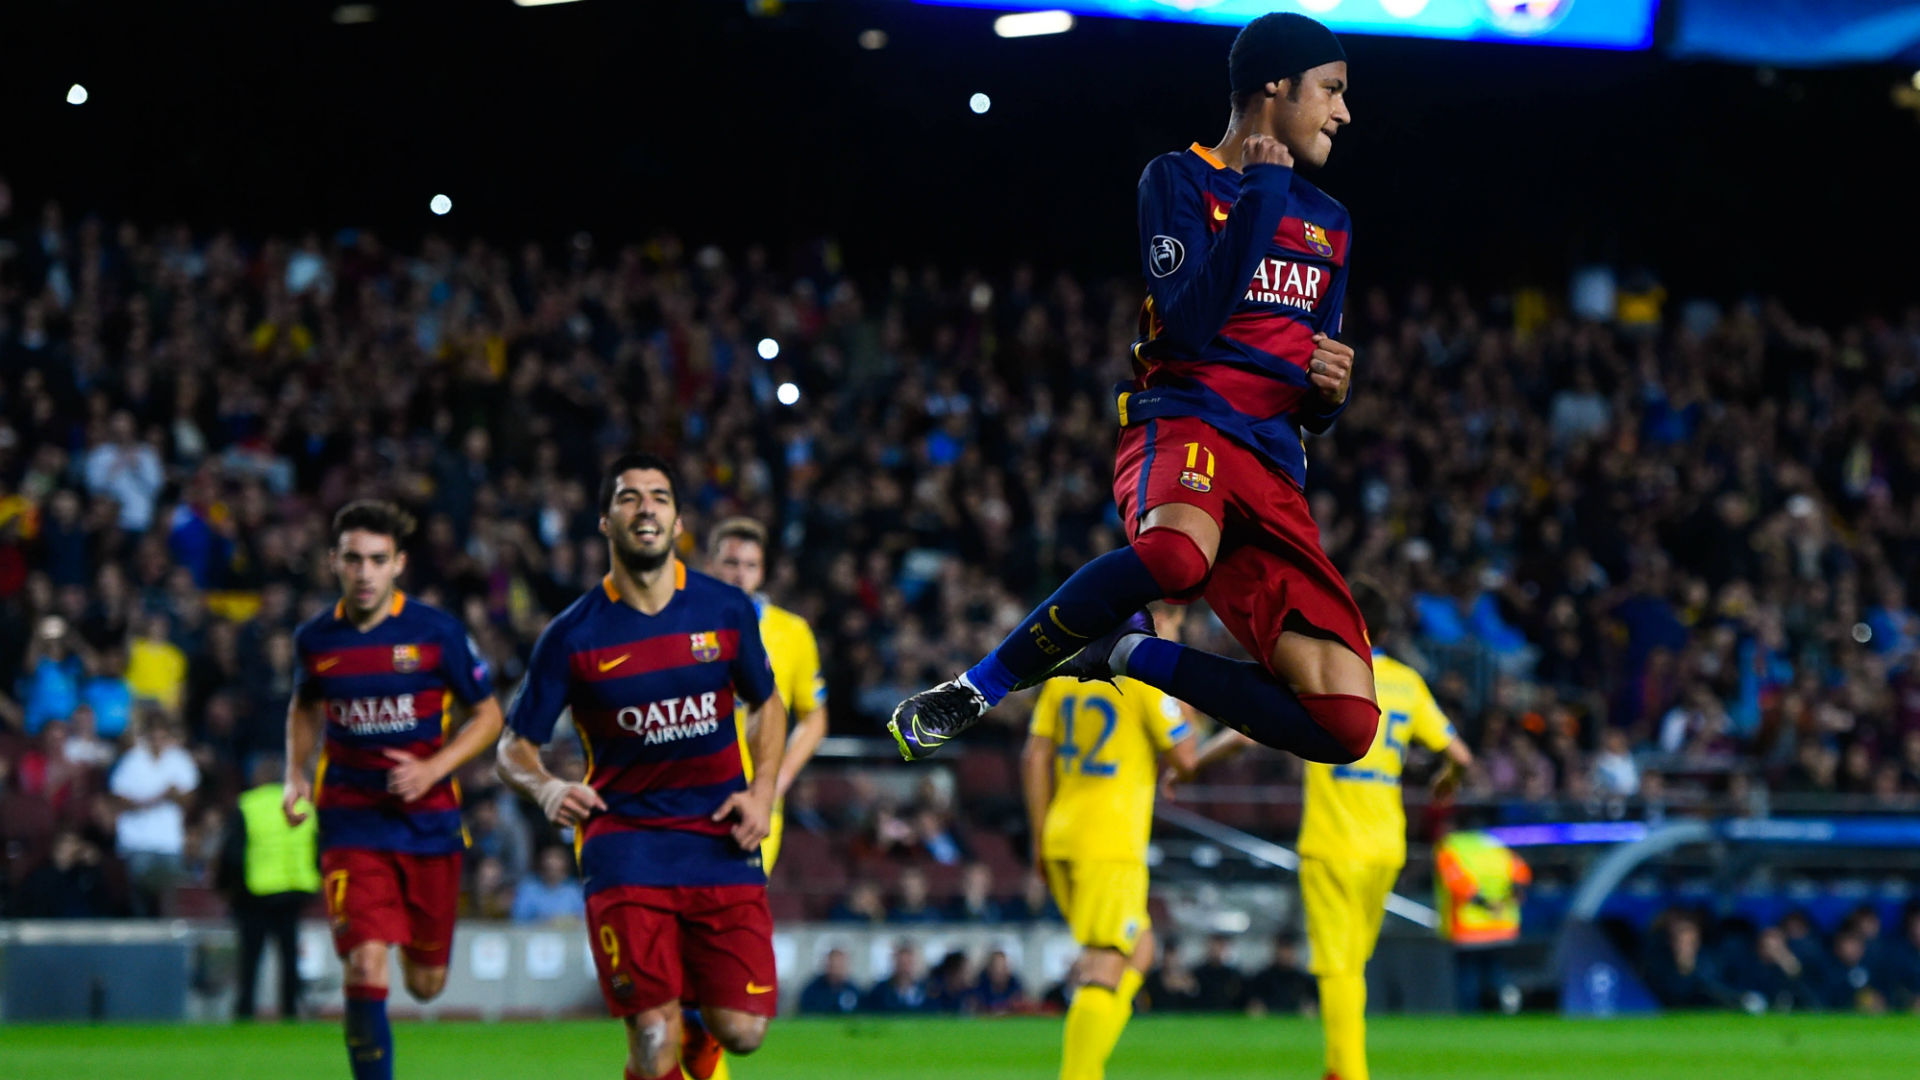 Video - Neymar double inspires Luis Enrique's side to victory